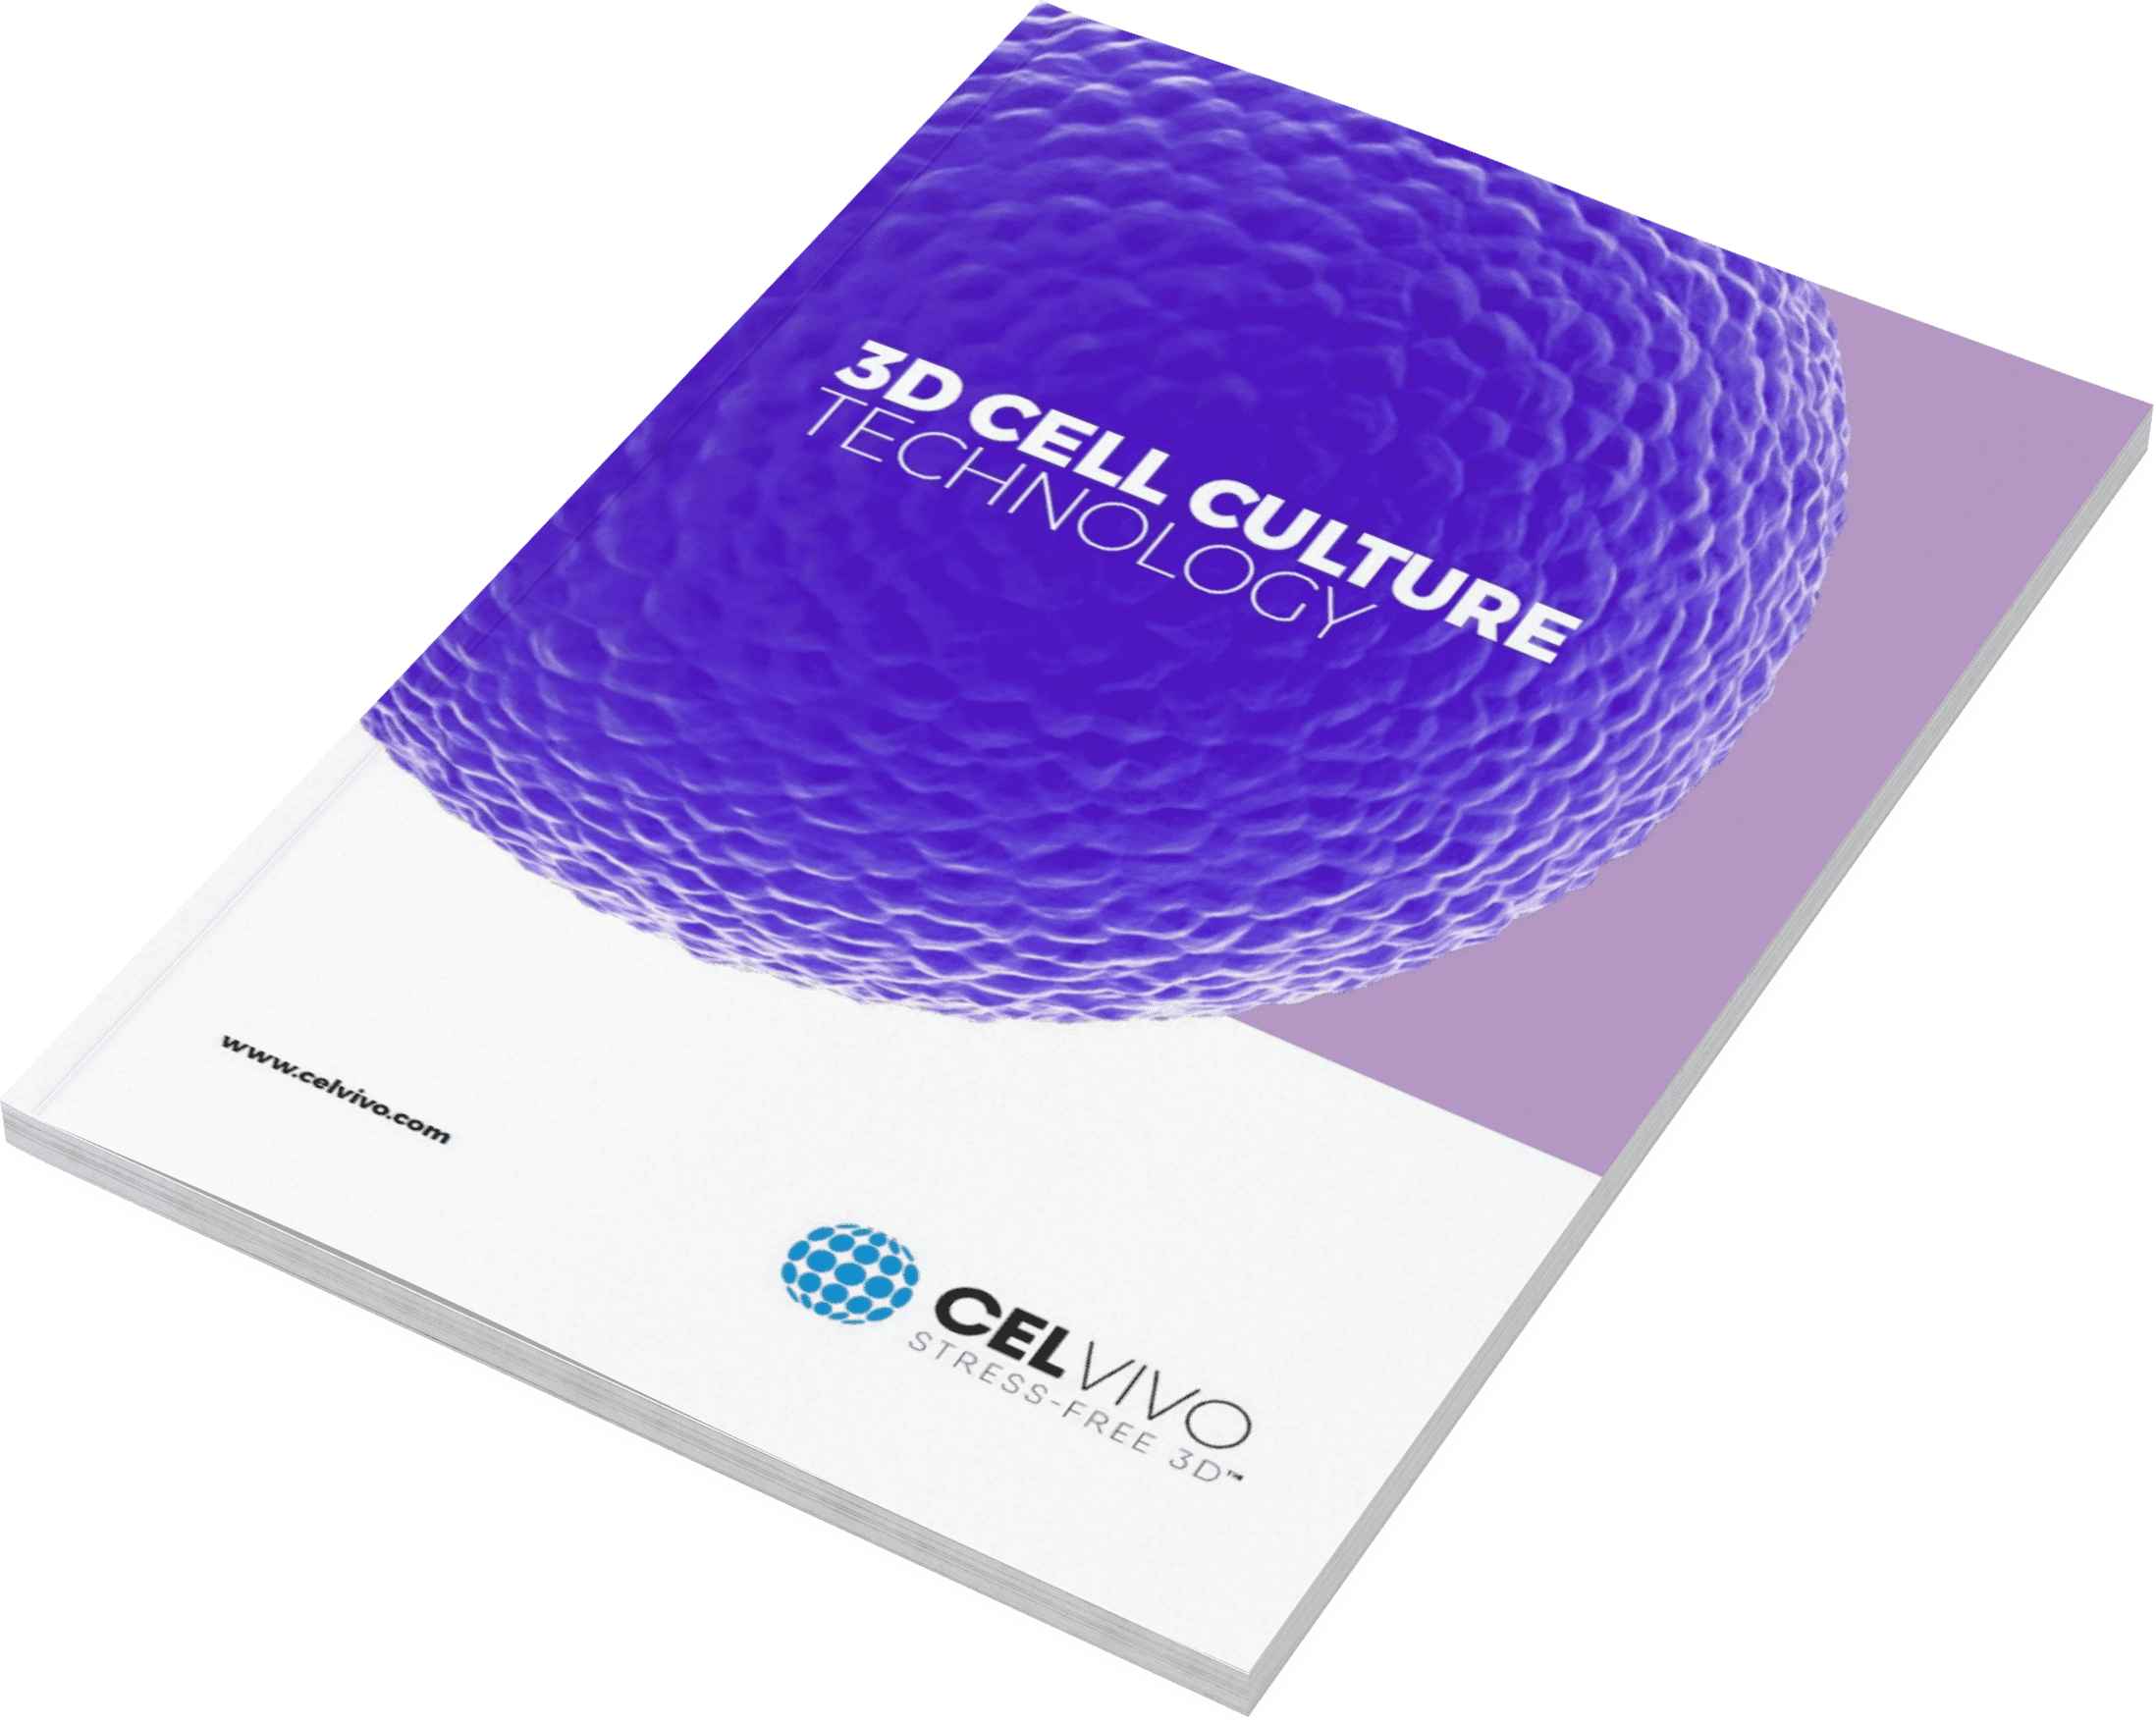 CelVivo brochure about in vitro models and 3D cell culture technology.